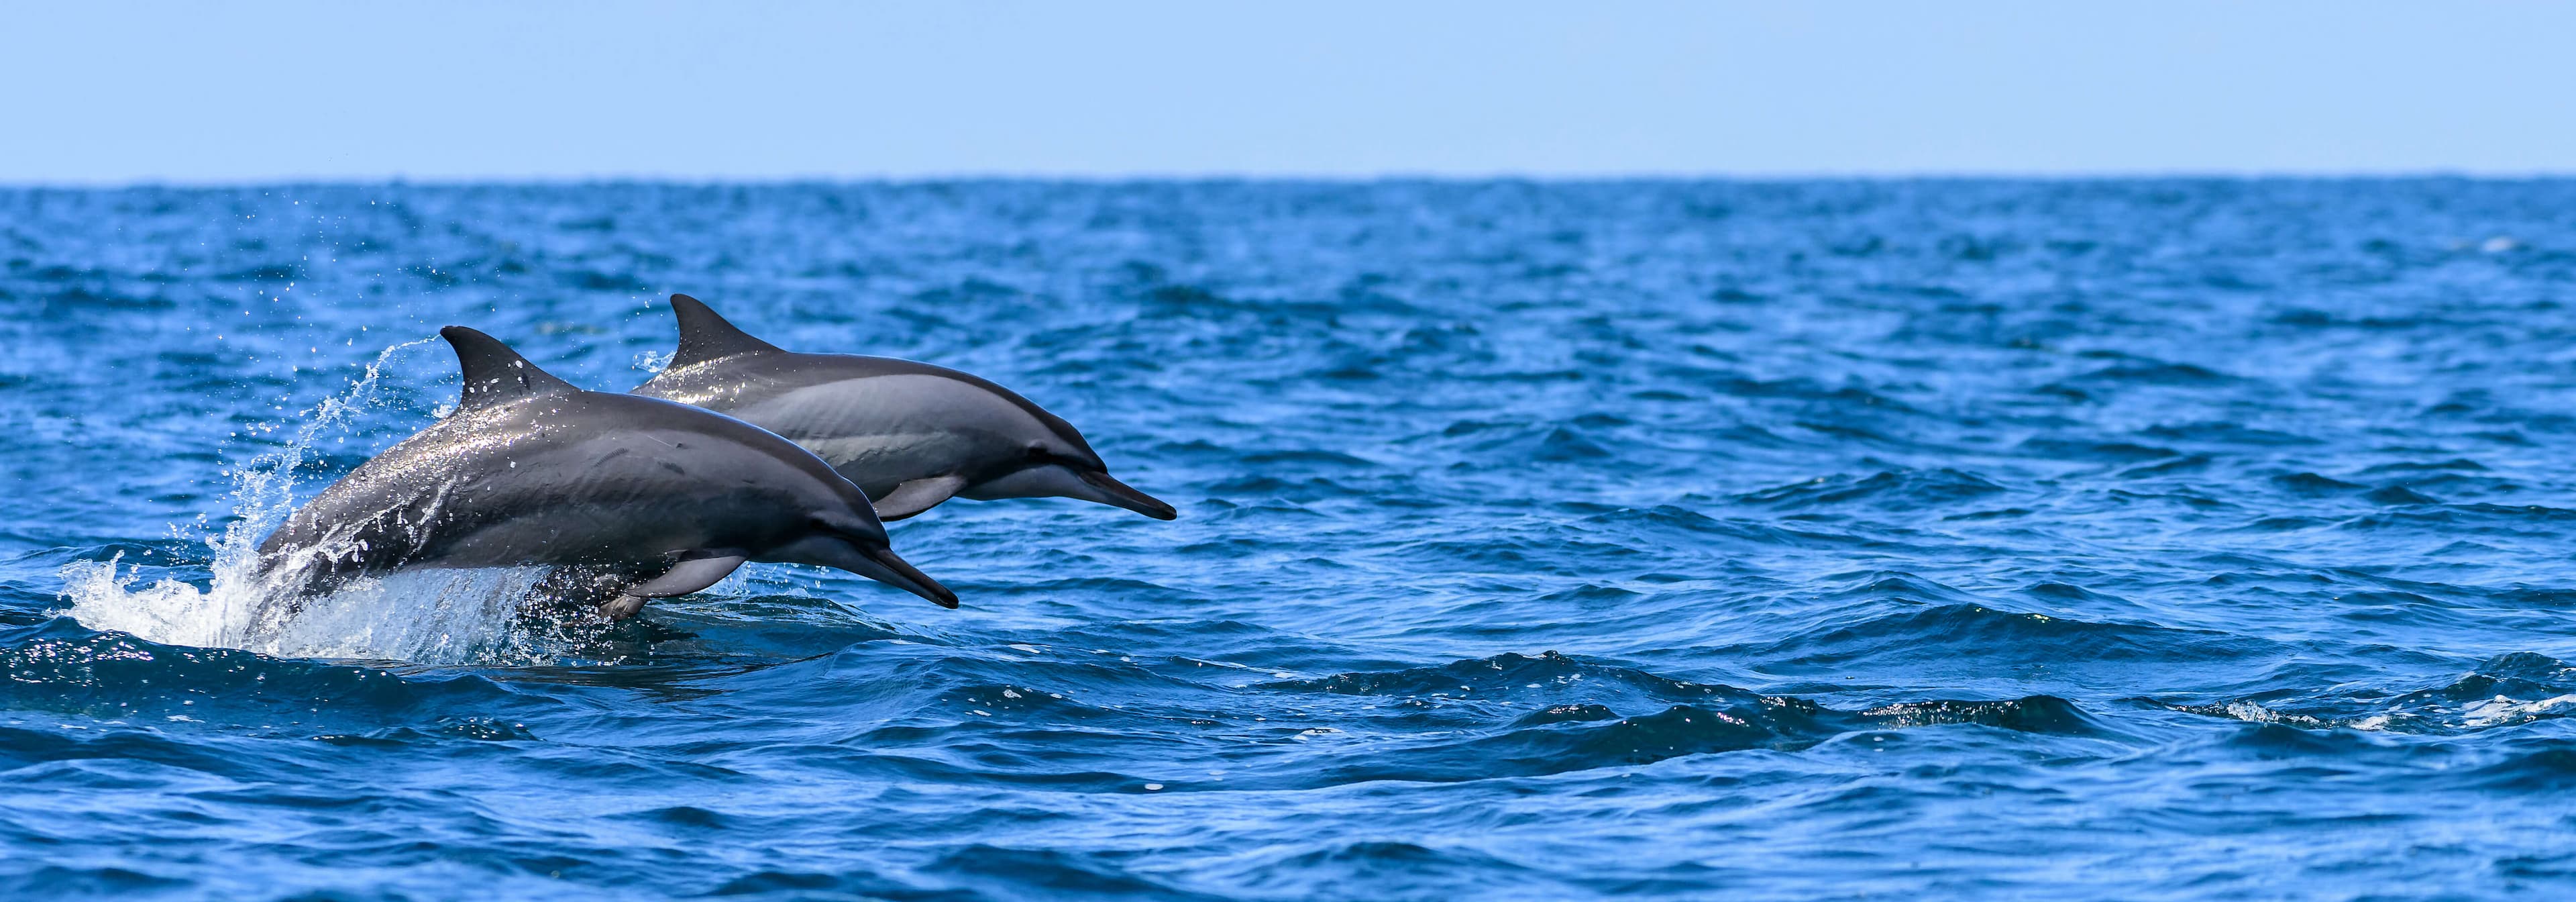 Spinner Dolphins Jumping out of the Water off the Coast of Kalpitiya, Sri Lanka.